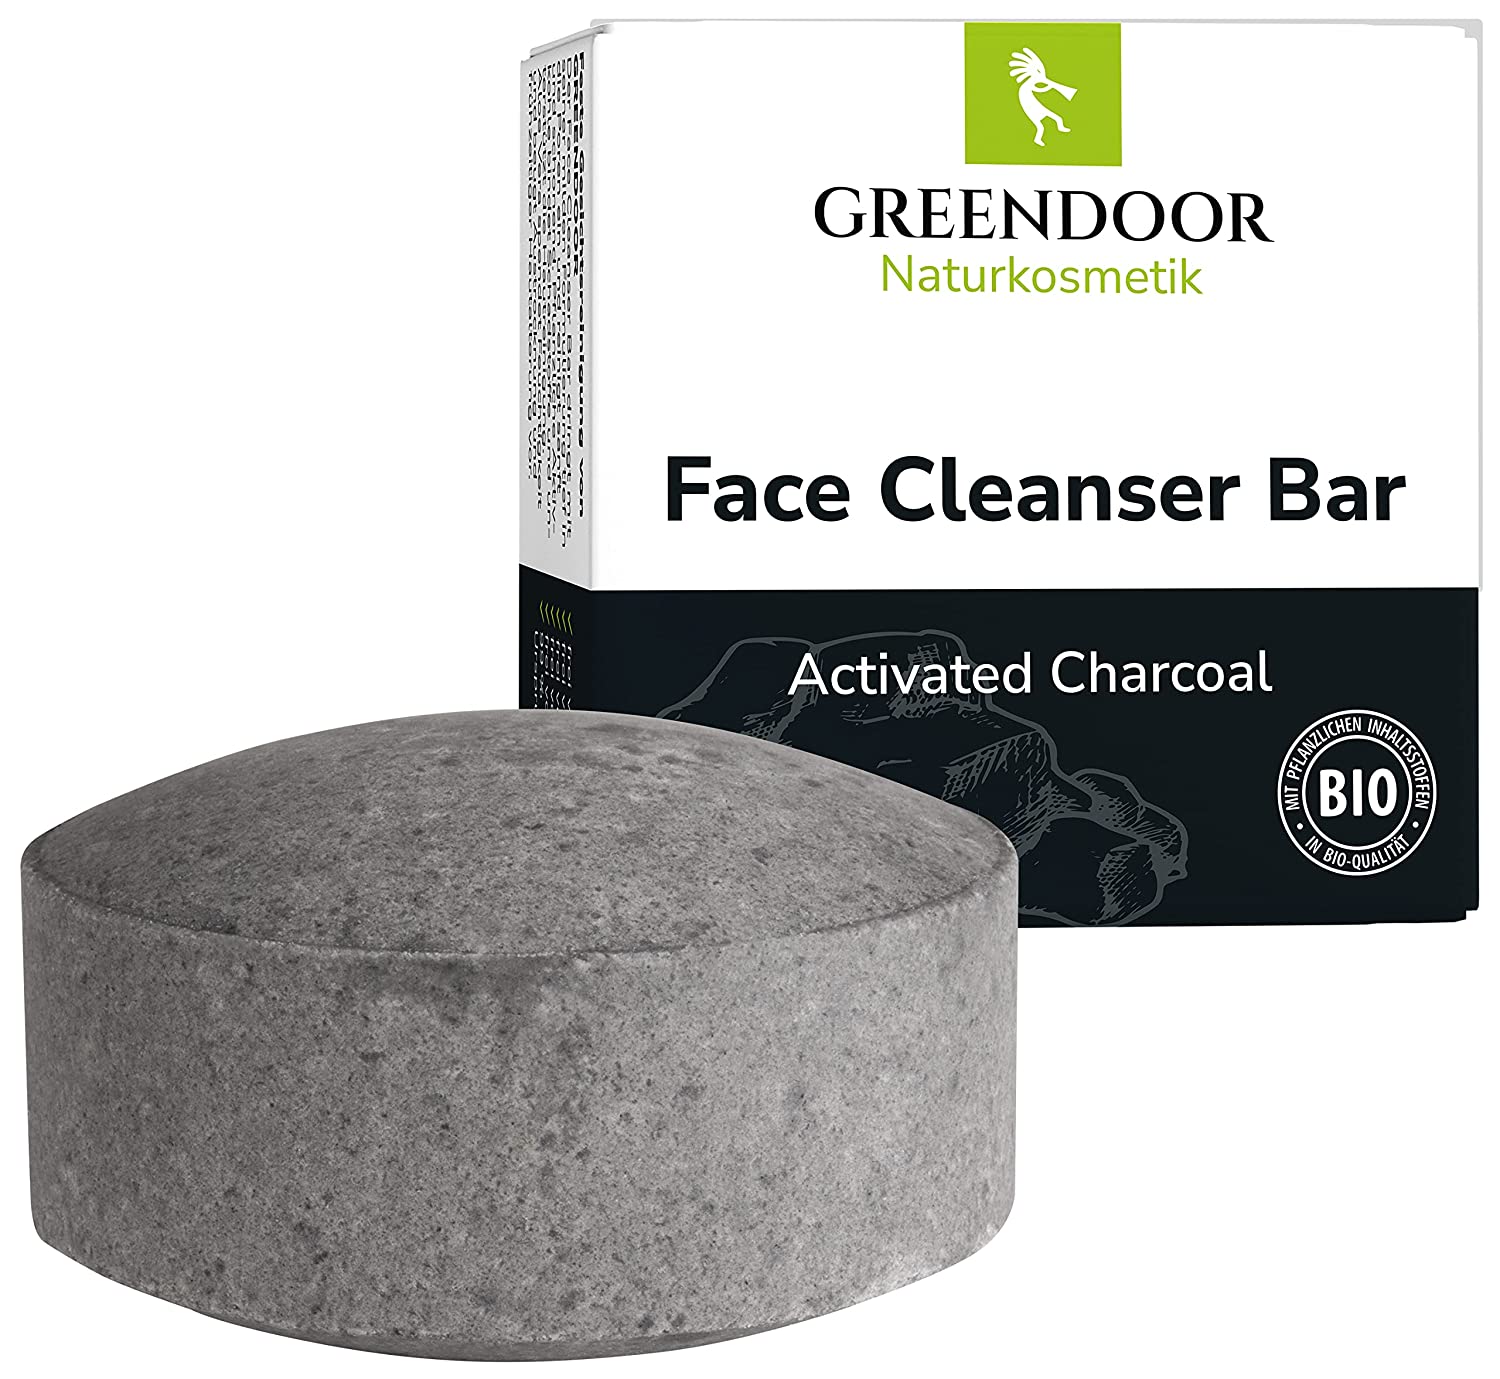 GREENDOOR Solid facial cleansing with activated carbon against pimples, 57 g, for blemished skin, combination skin, oily skin, soap-free, naturally plastic-free, with skin-nourishing aloe vera and organic sesame oil, unisex